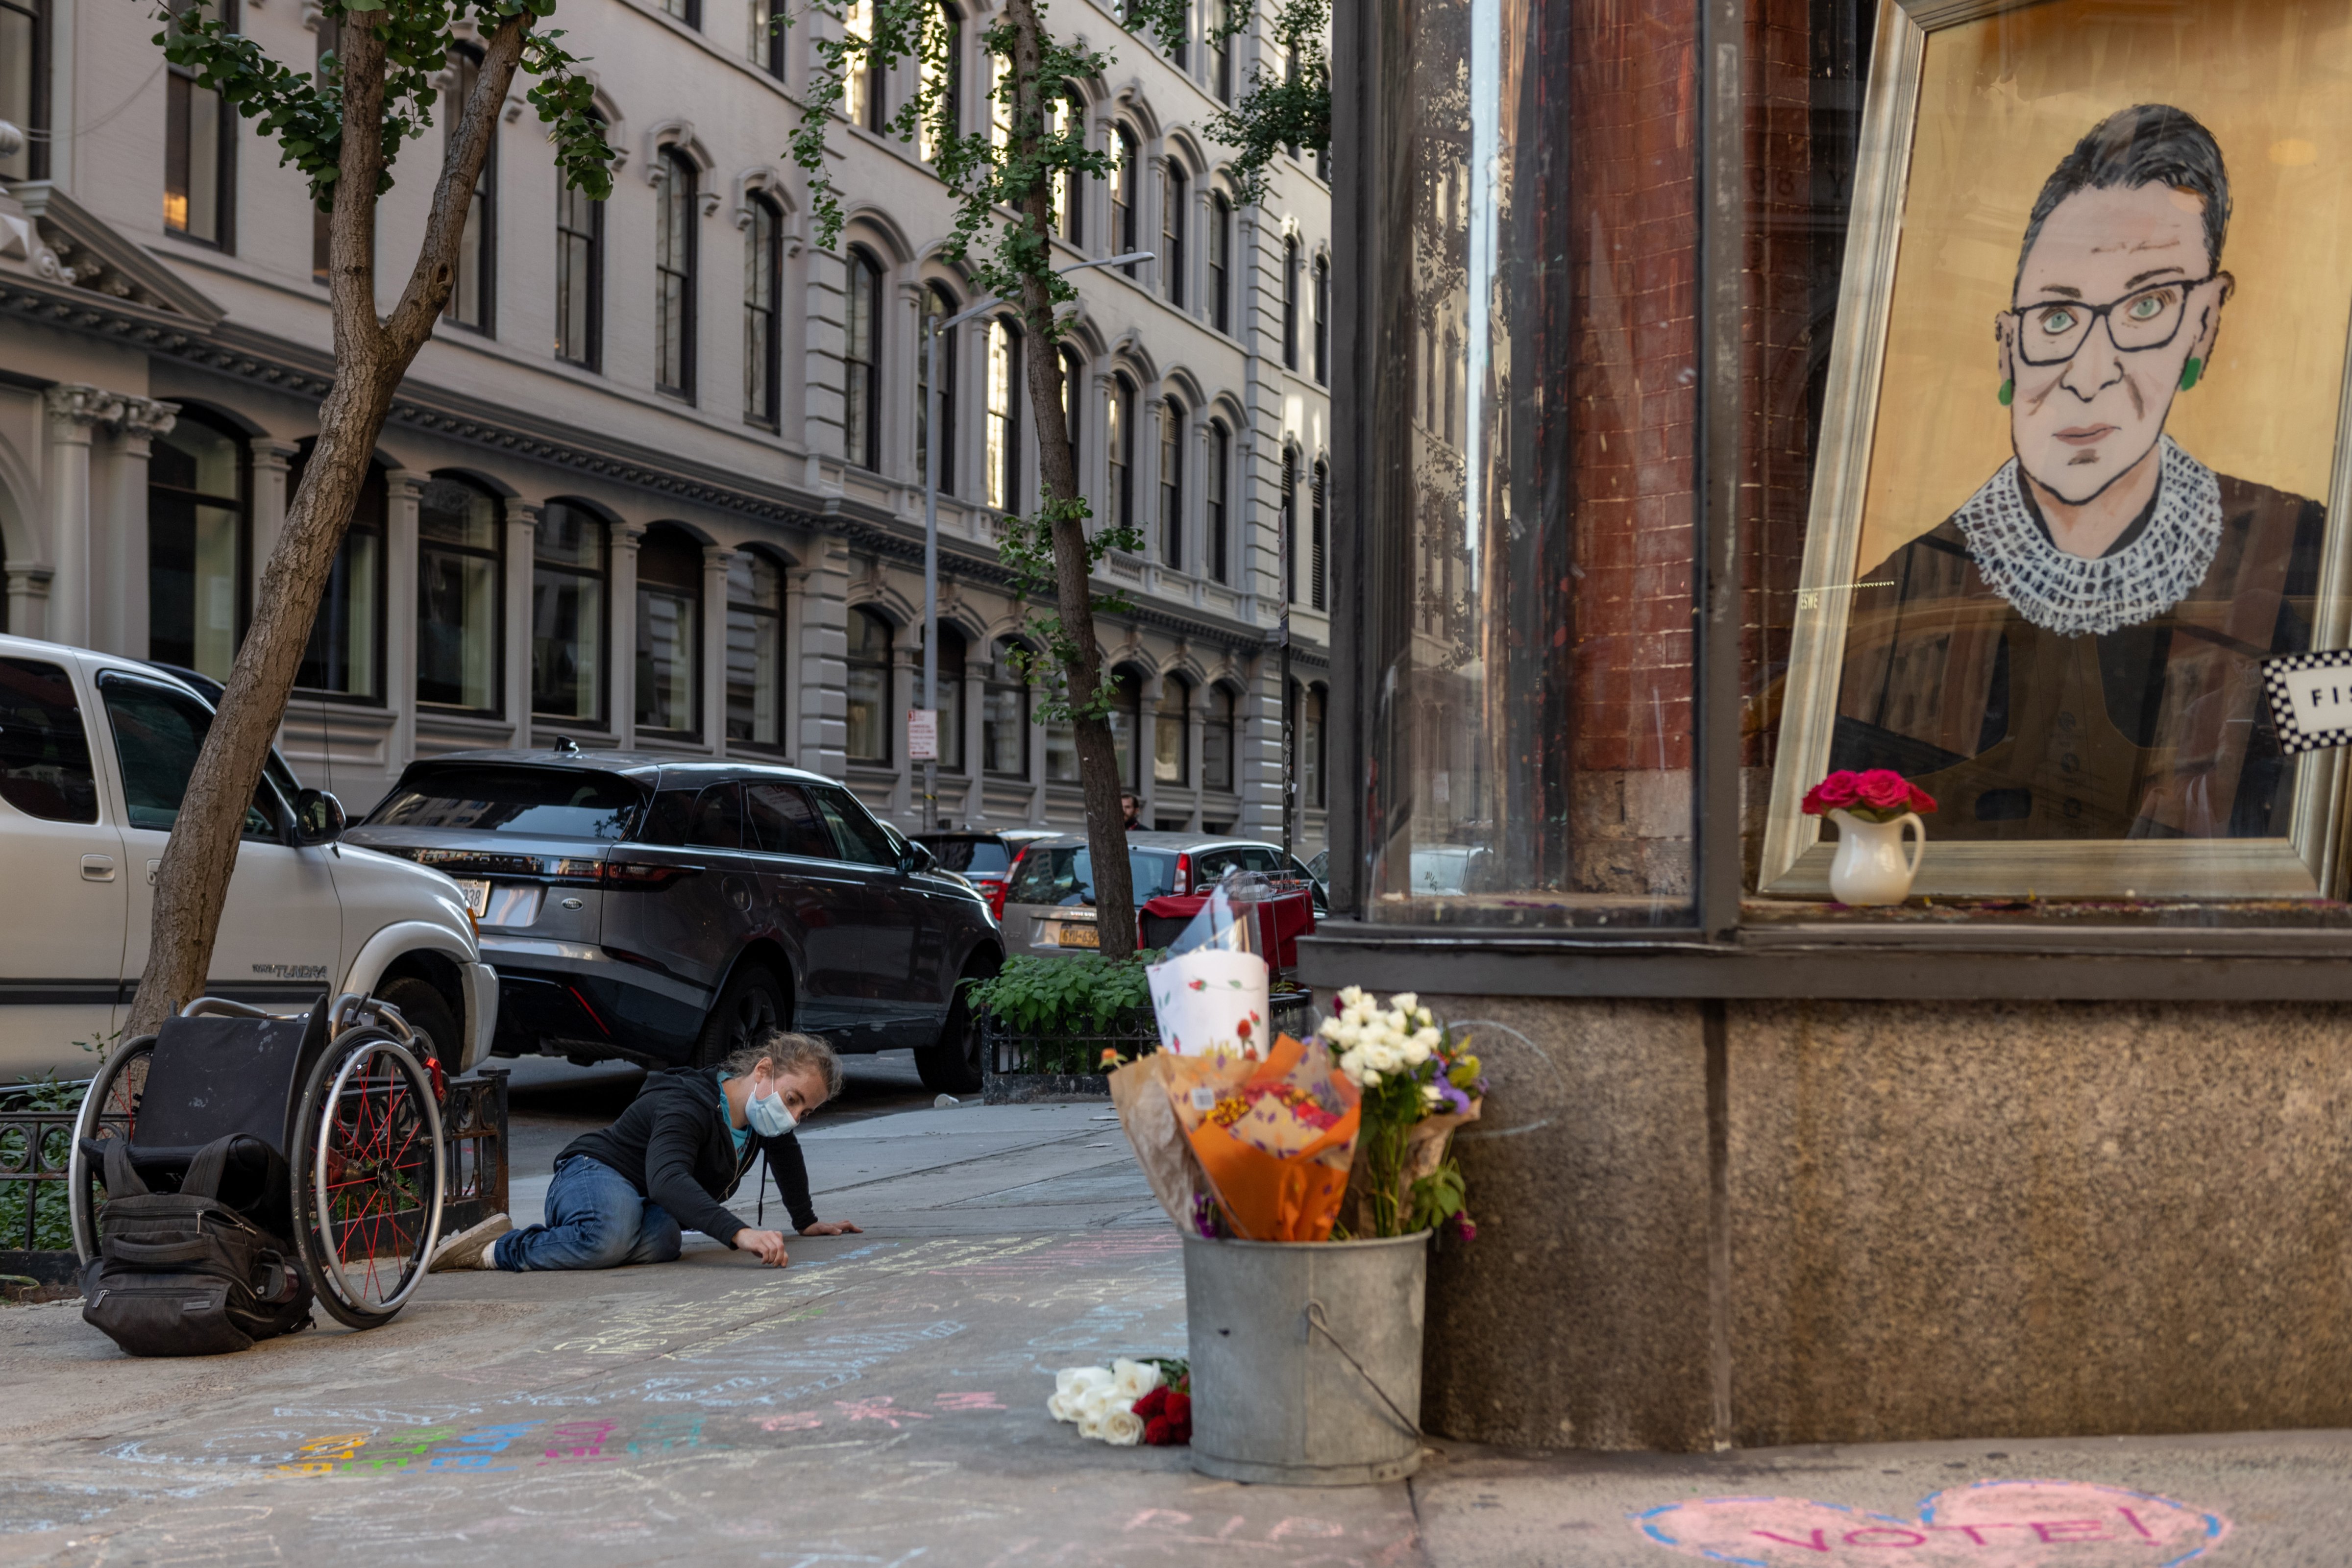 A woman wearing a mask writes a message in chalk in front of a painting of the late Associate Justice of the Supreme Court Ruth Bader Ginsburg on Sept. 19 in New York City. Ginsburg died on Sept. 18. (Alexi Rosenfeld—Getty Images)